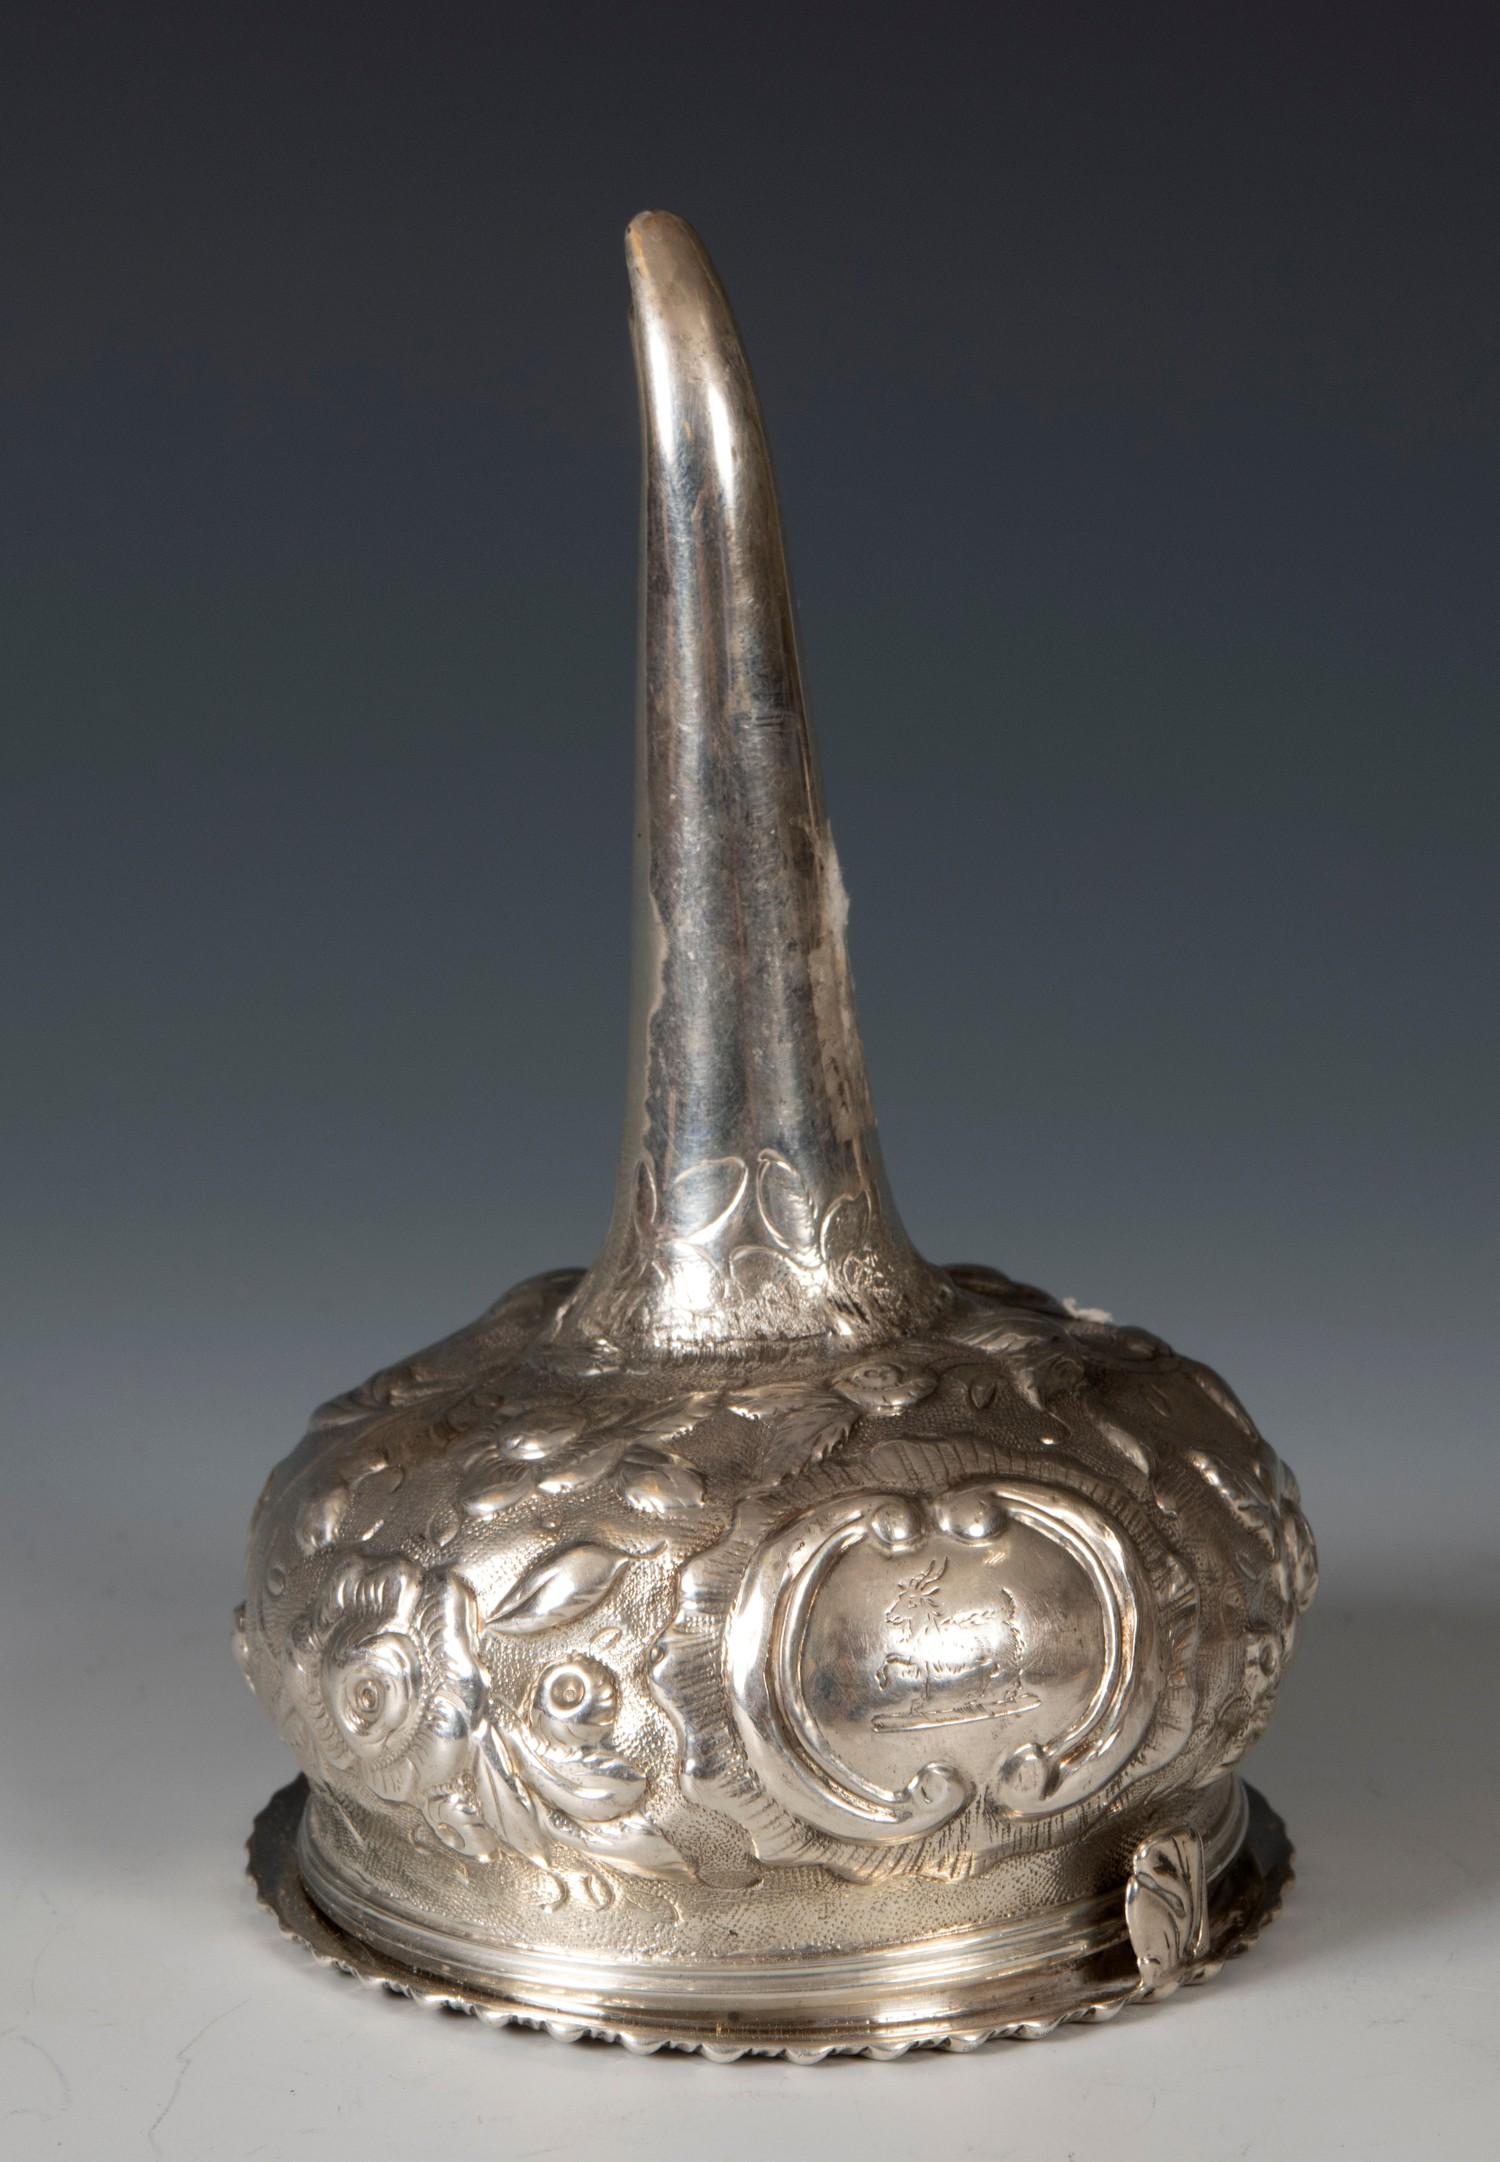 A George III silver wine funnel, crested, and with embossed decoration, London 1810, 12.5 cm high